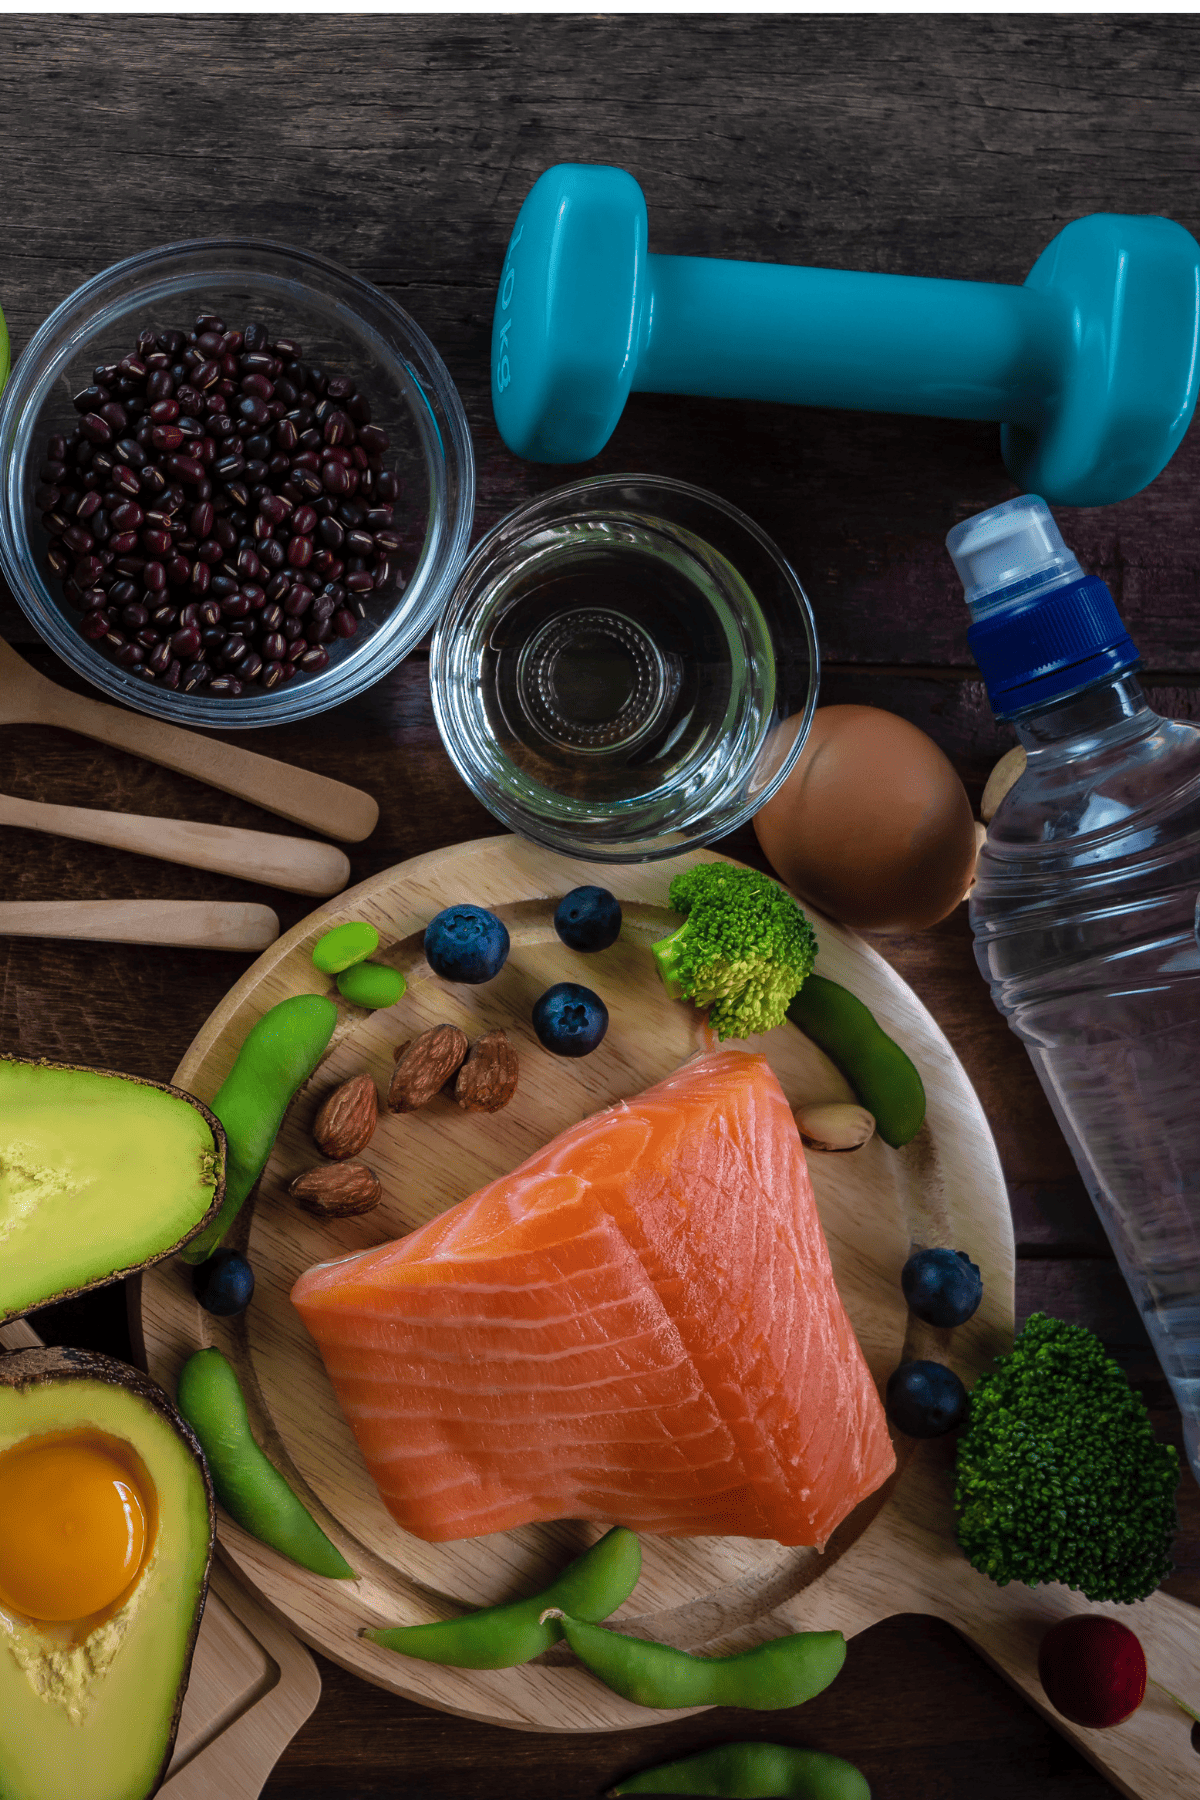 weights, water, and healthy foods for treating insulin resistance.